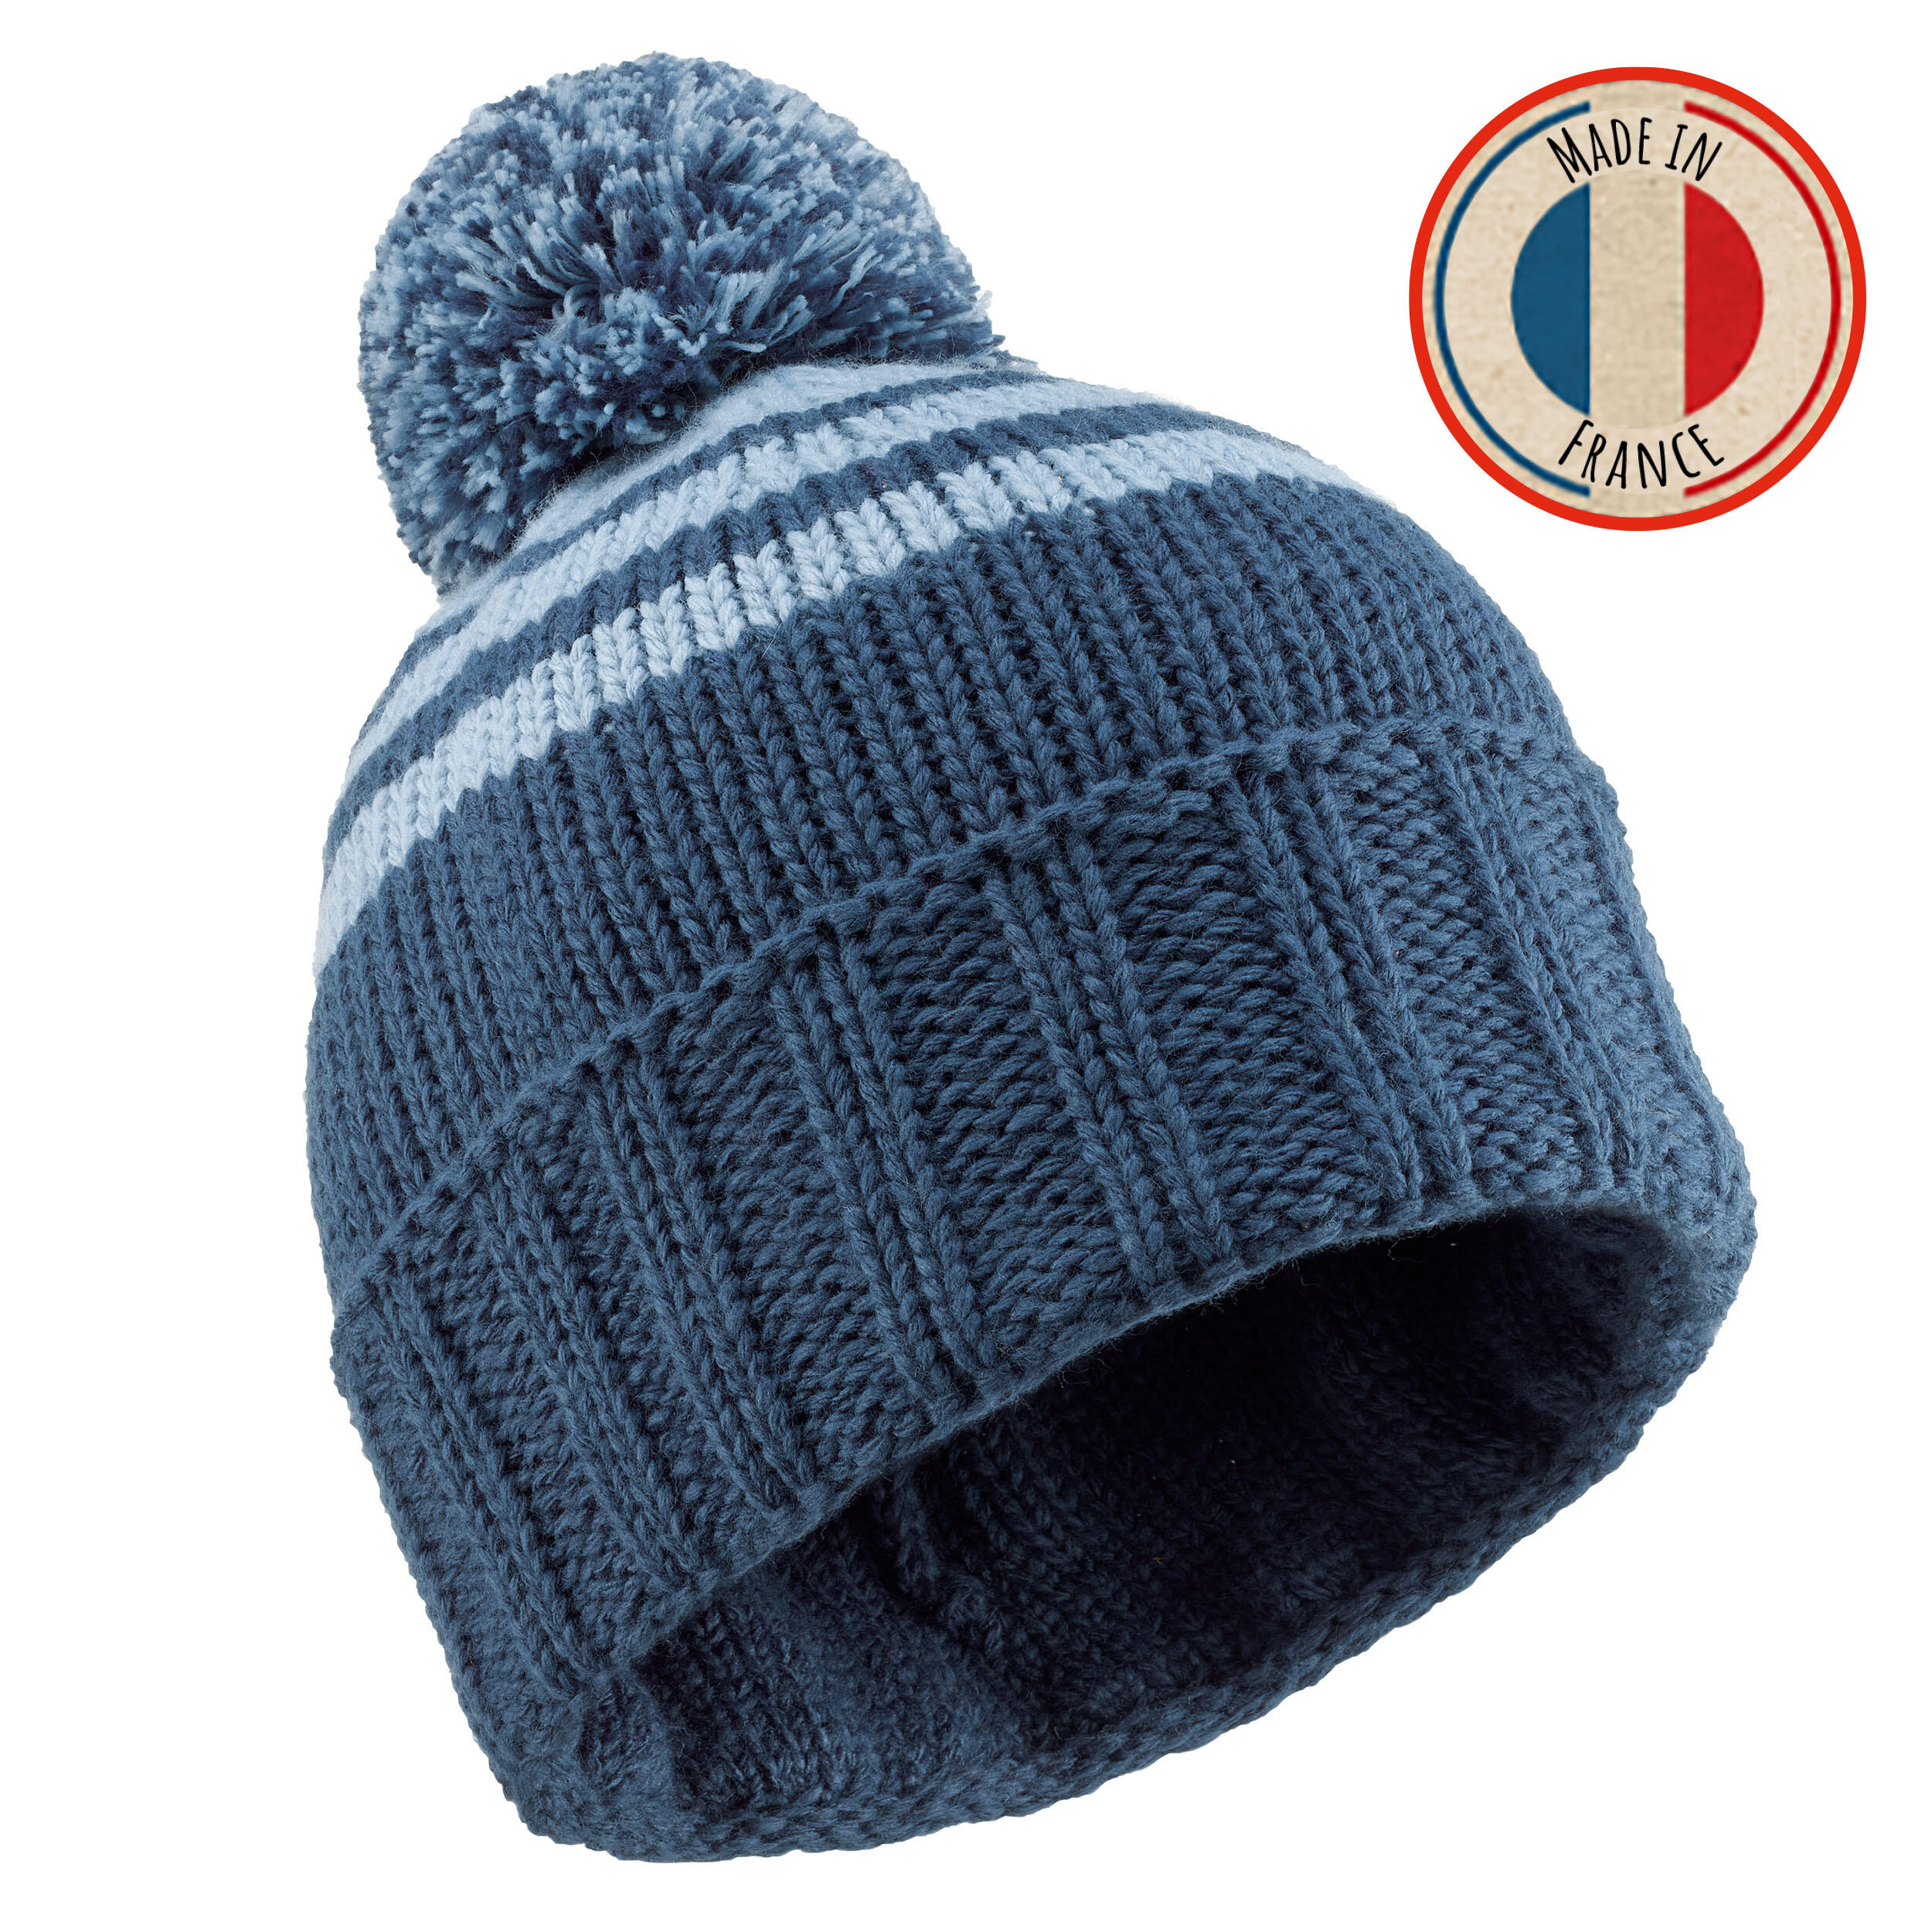 ADULT SKI HAT GRAND NORD MADE IN FRANCE NAVY BLUE-BLUE 1/8